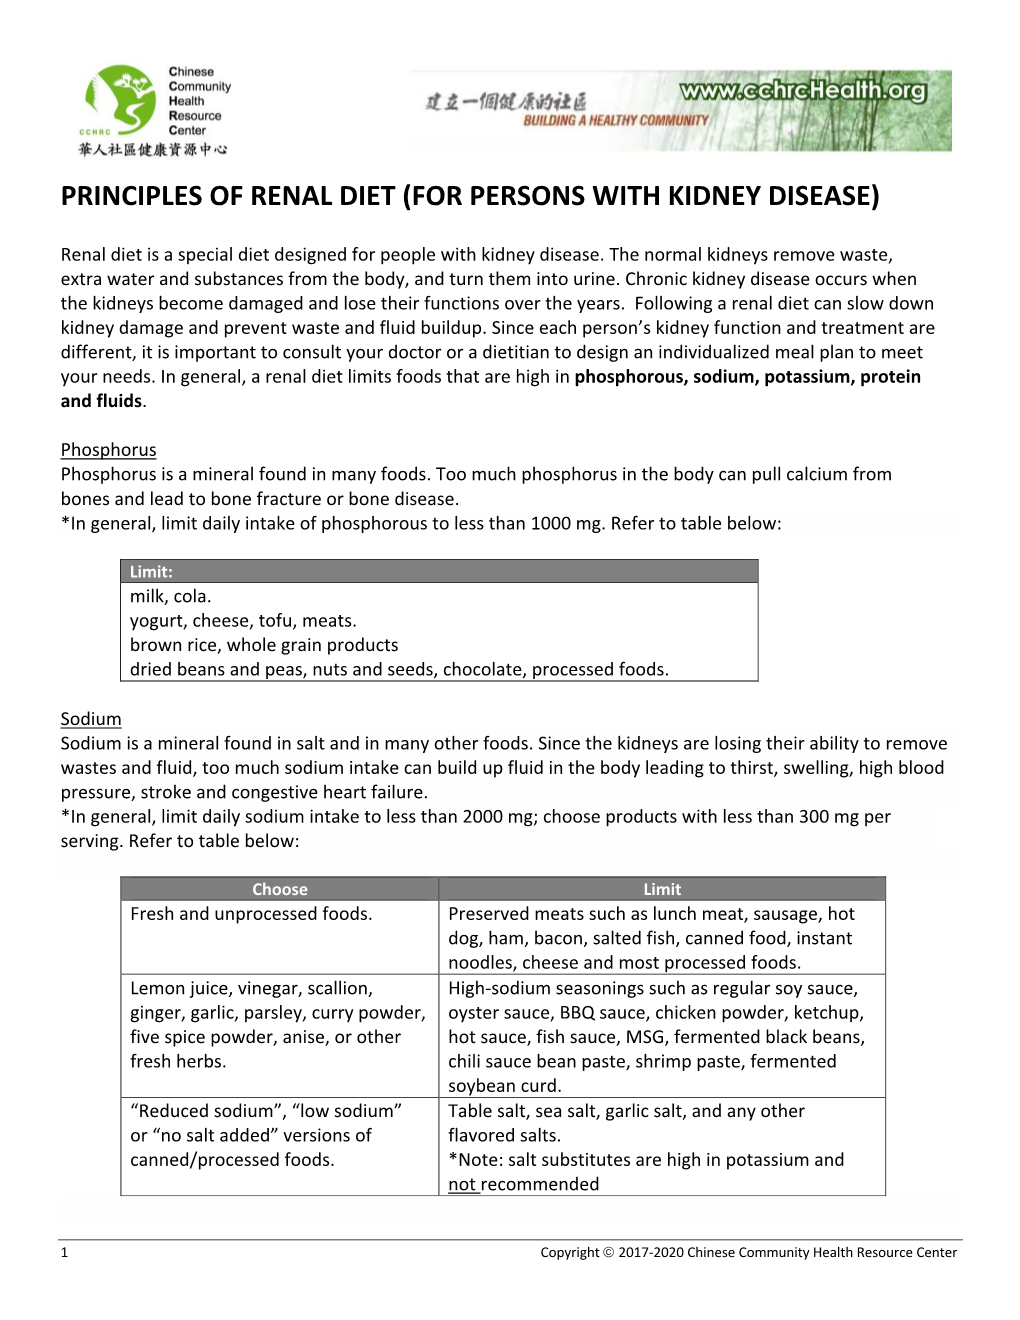 Principles of Renal Diet (For Persons with Kidney Disease)